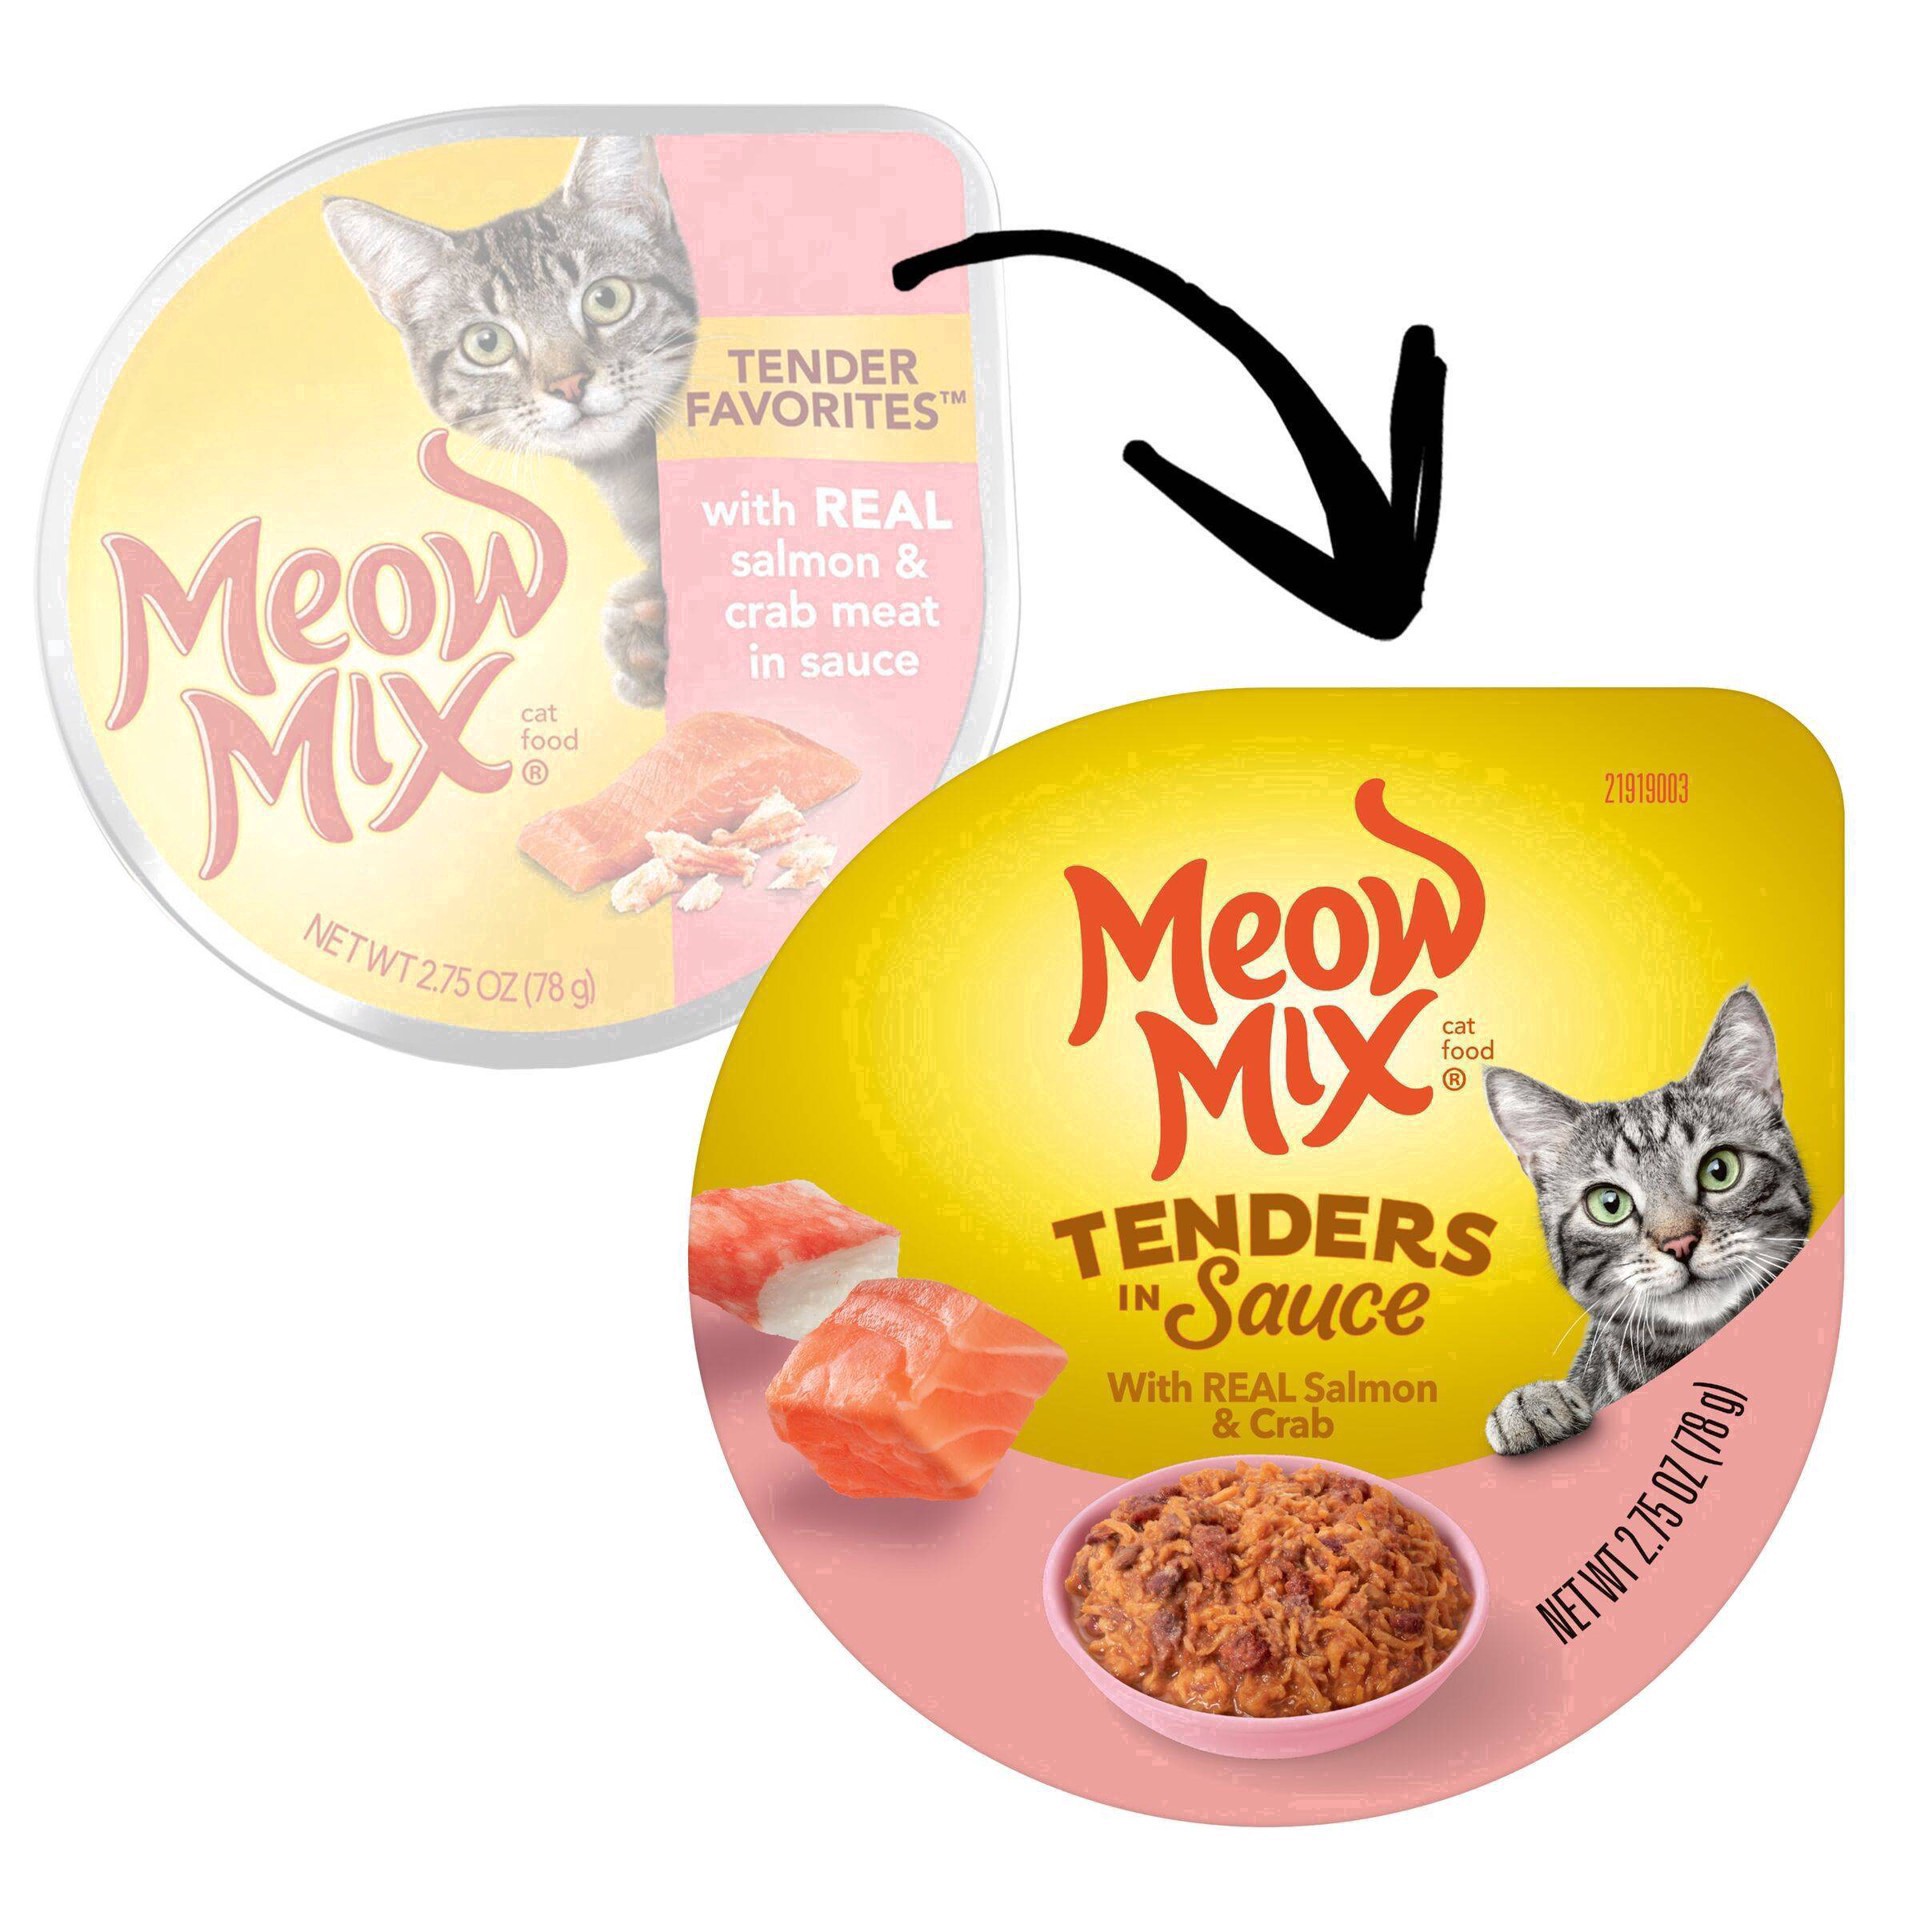 slide 40 of 64, Meow Mix Tenders in Sauce Wet Cat Food With REAL Salmon & Crab, 2.75 Oz. Cup (Packaging And Formulation Updates Underway), 2.75 oz